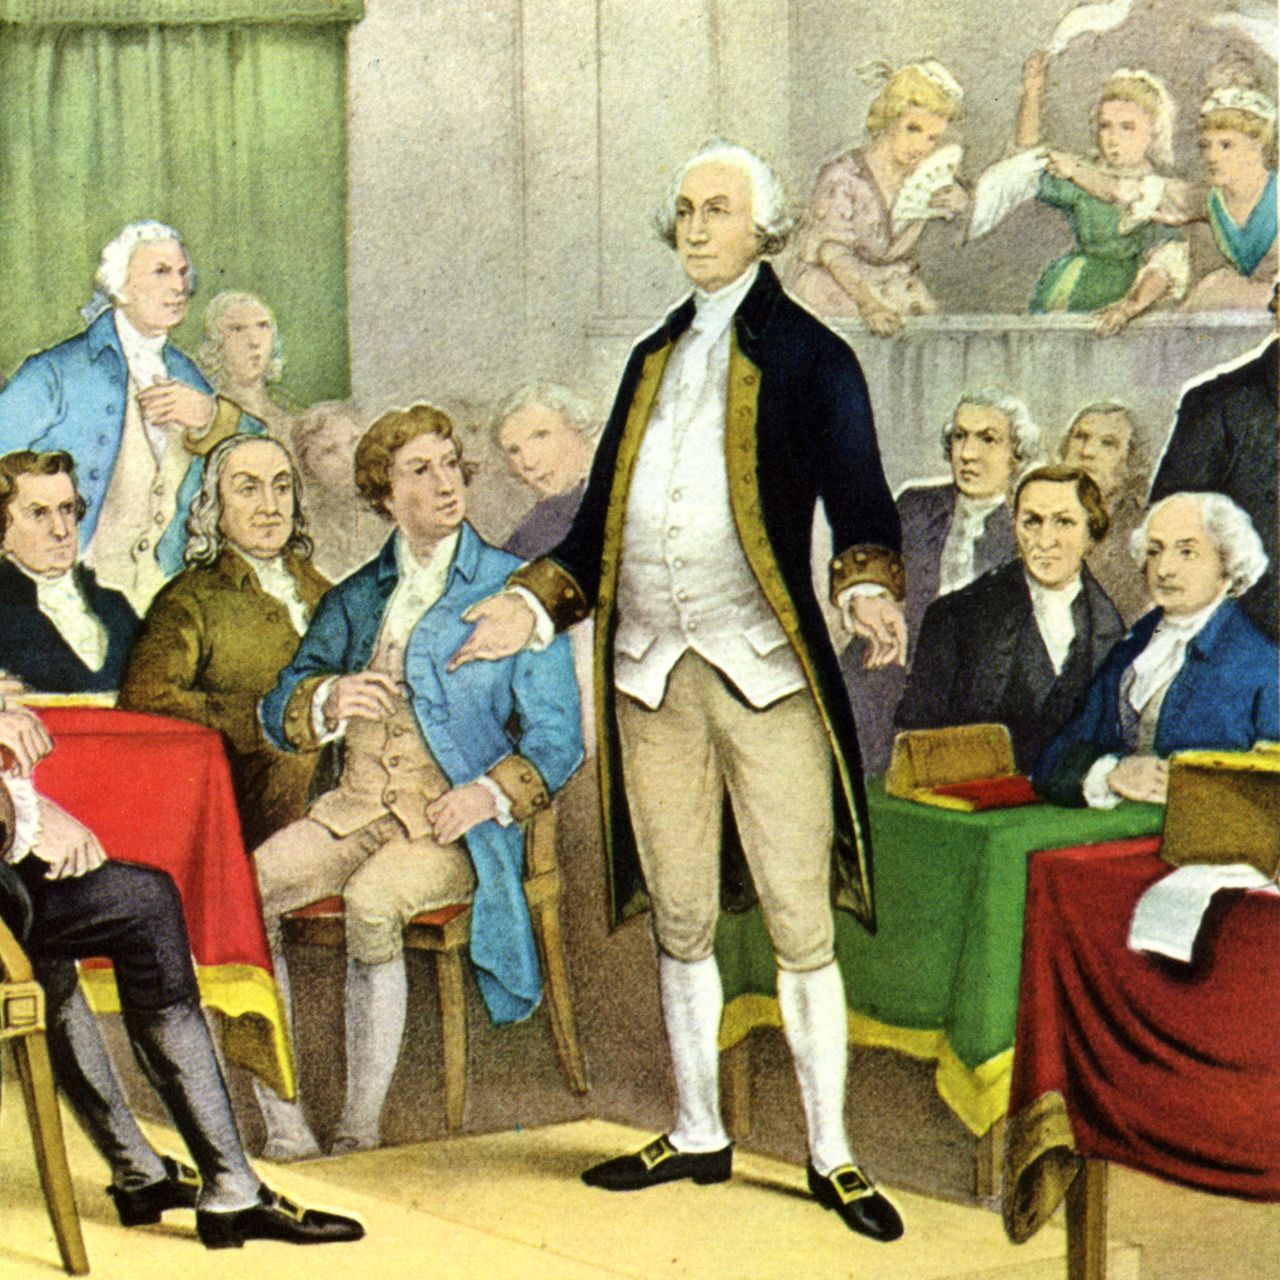 George Washington Facts - George Washington was an imposing figure at over 6 feet tall and 225 pounds. The average man at the time was only 5'6".-u/TheManInTheShack